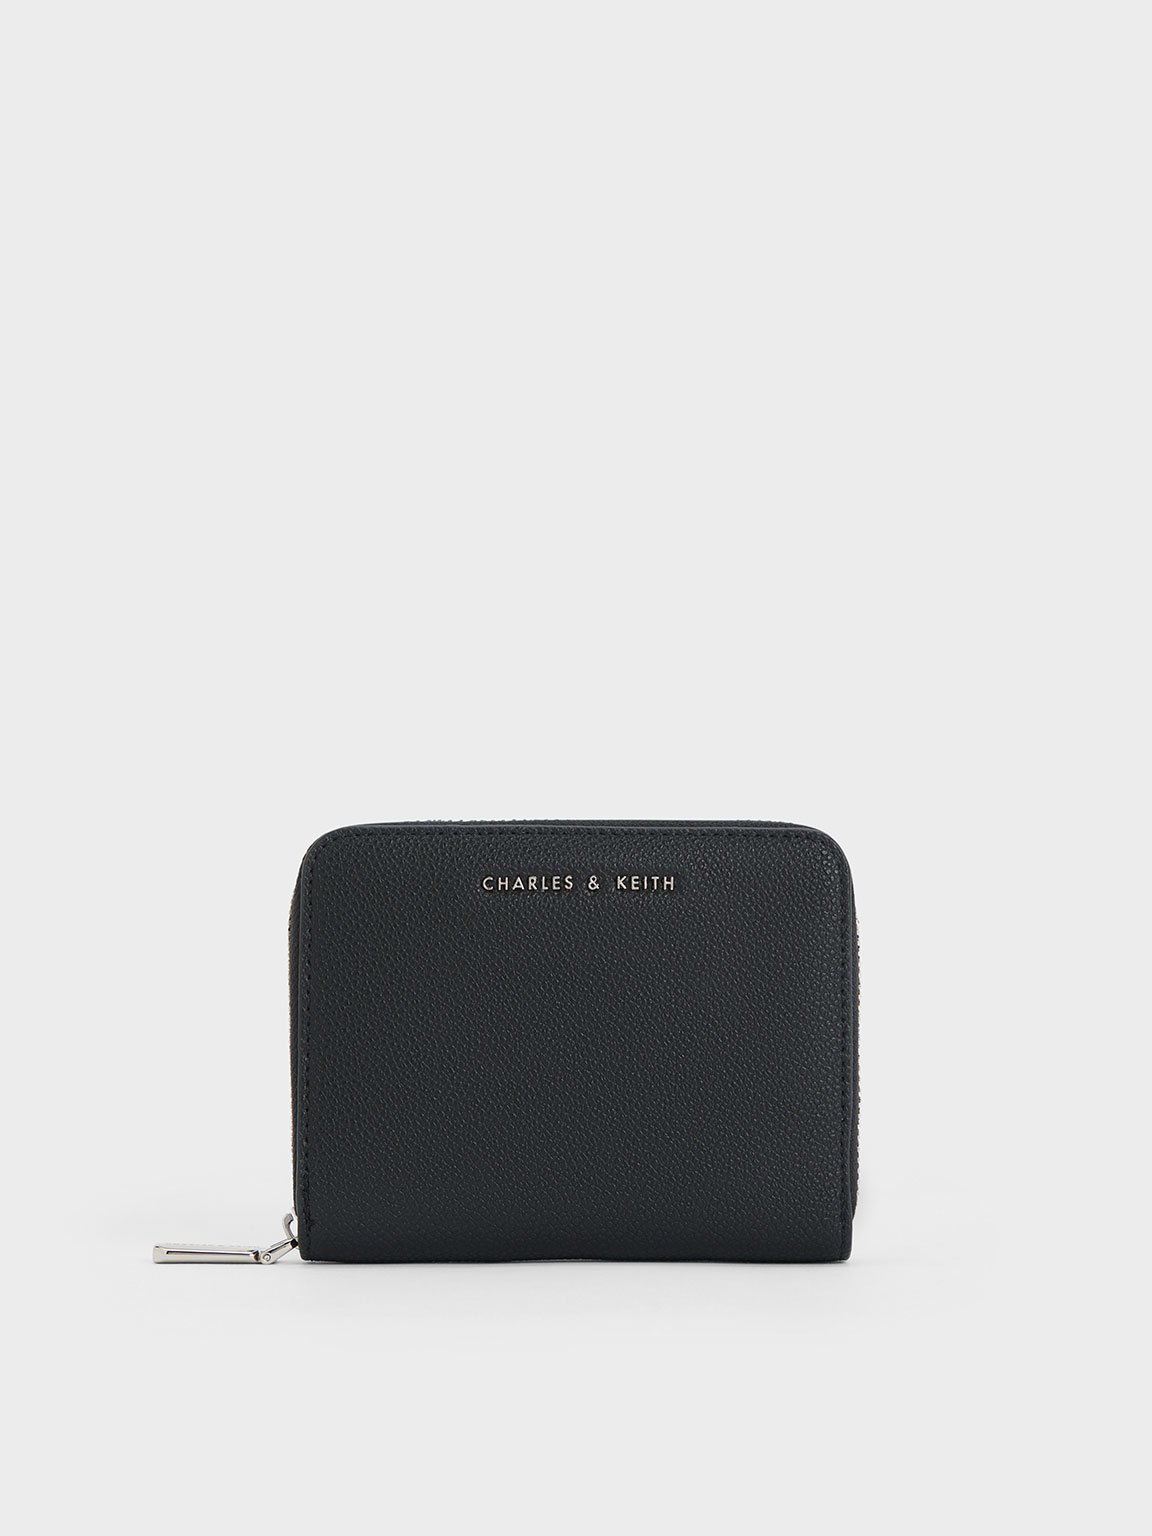 Charles & Keith Basic Square Wallet In Black